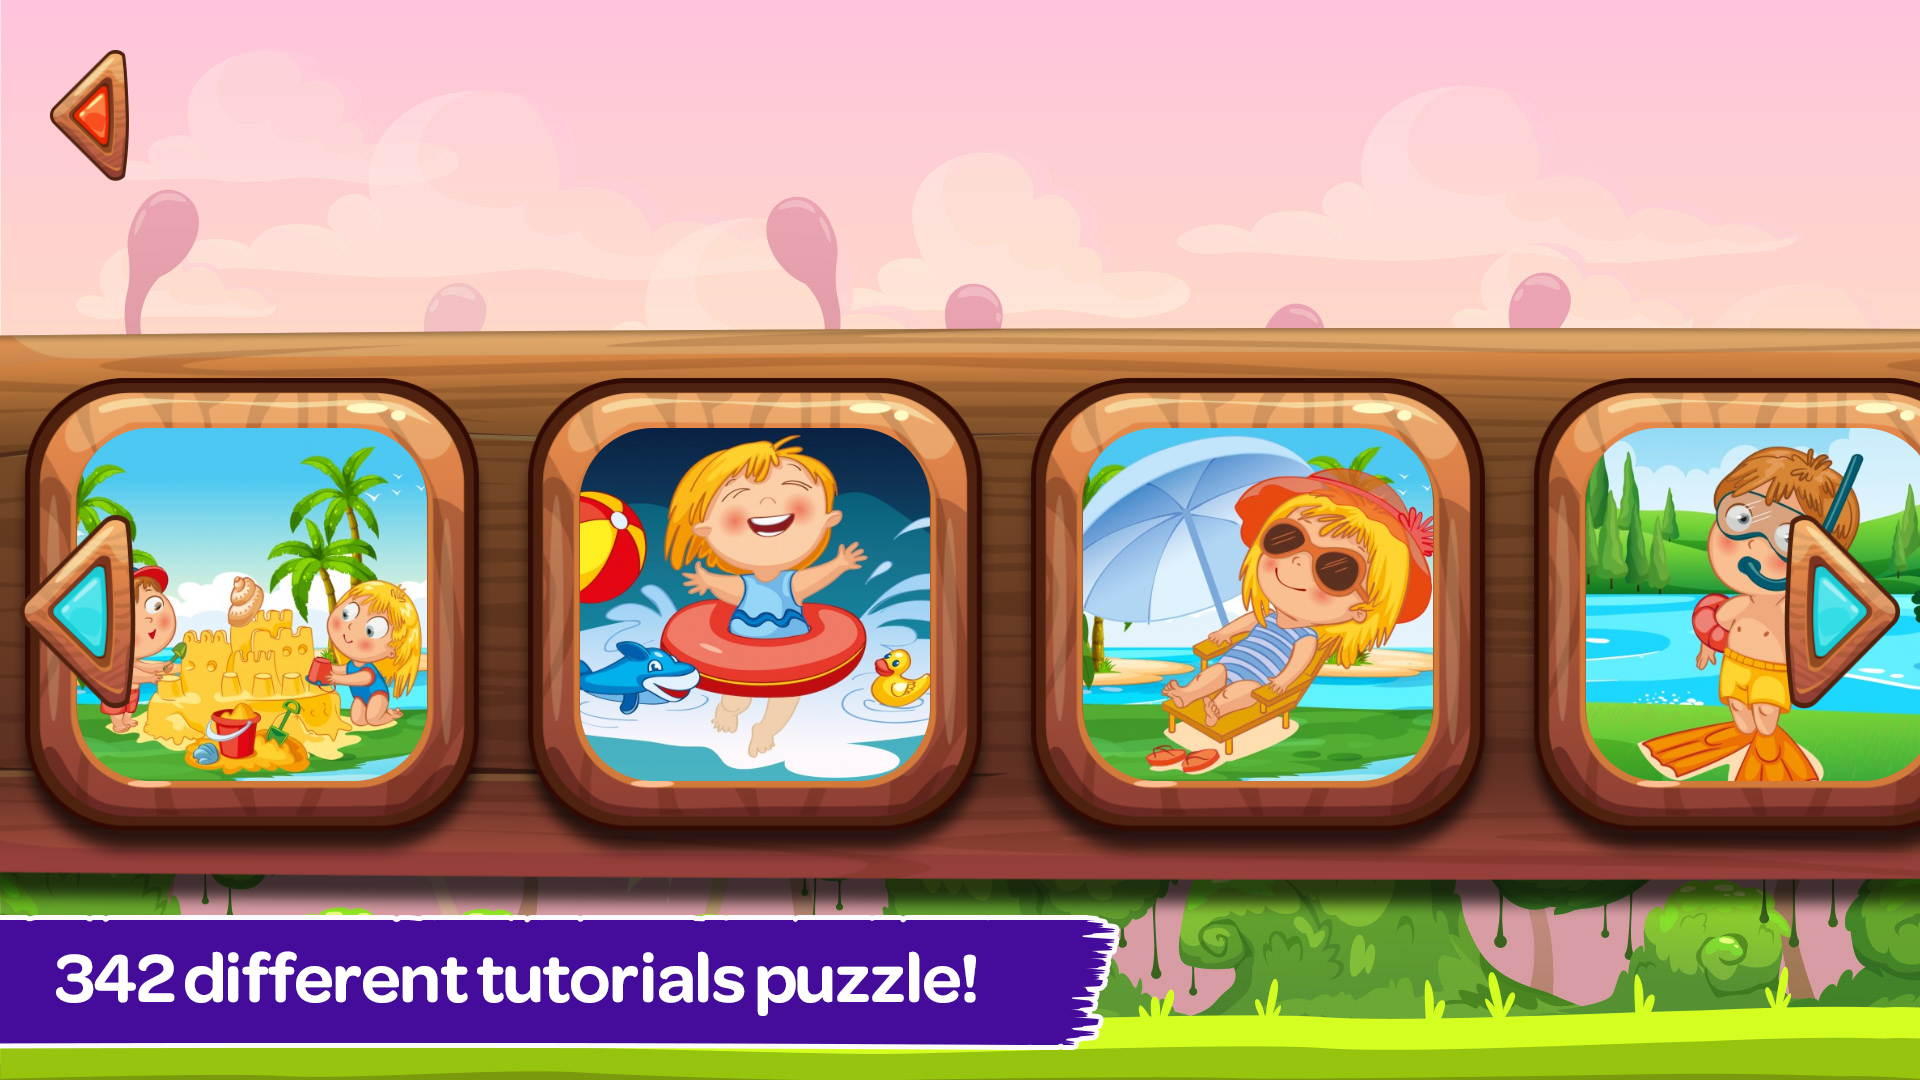 Puzzle Park - Free Jigsaw Puzzle Game